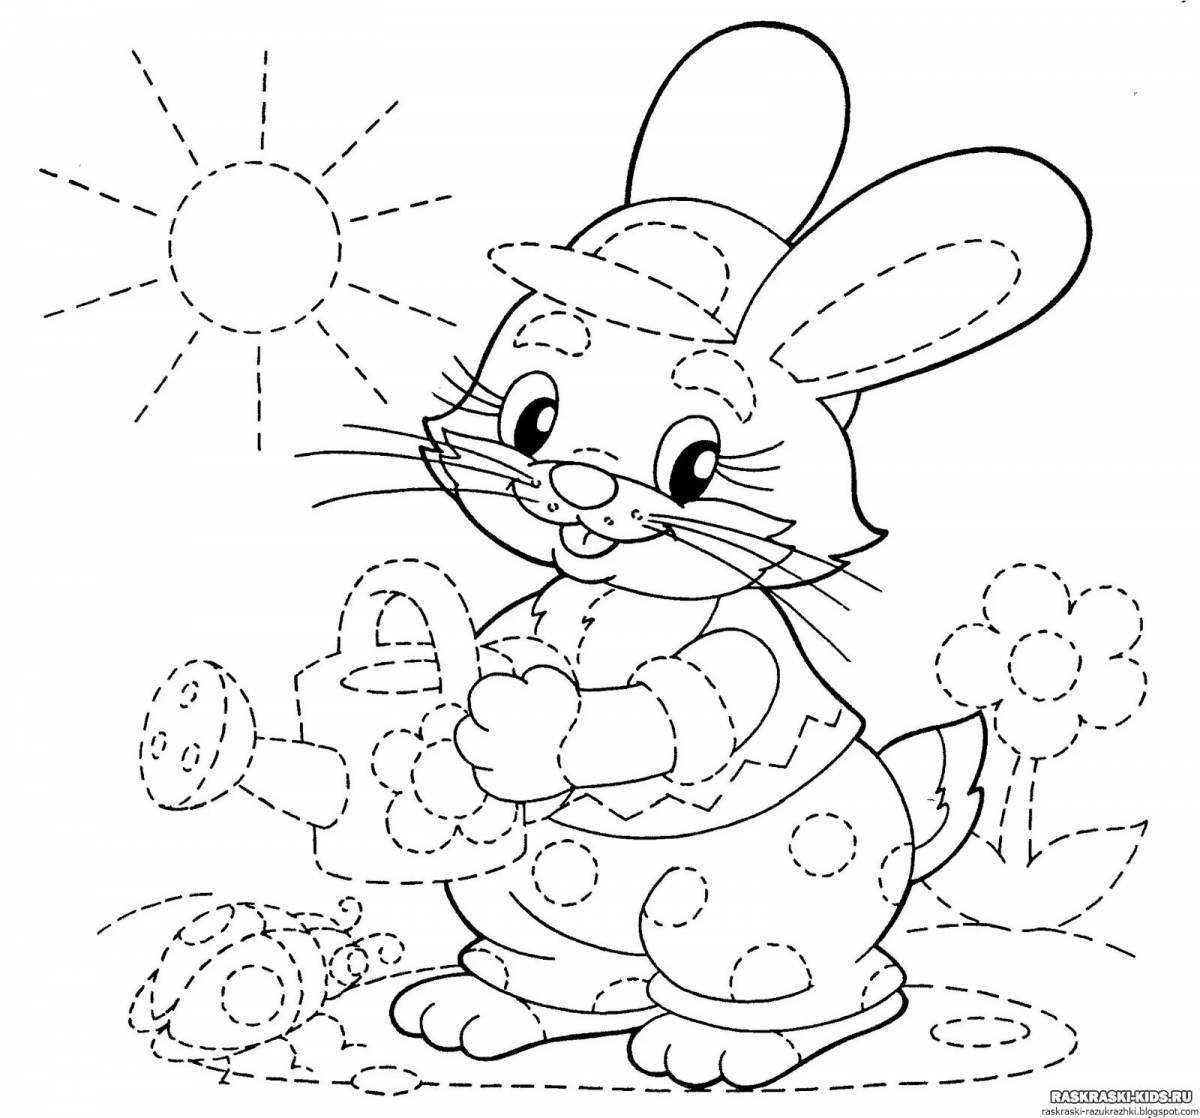 Colourful coloring book for children 5-6 years old